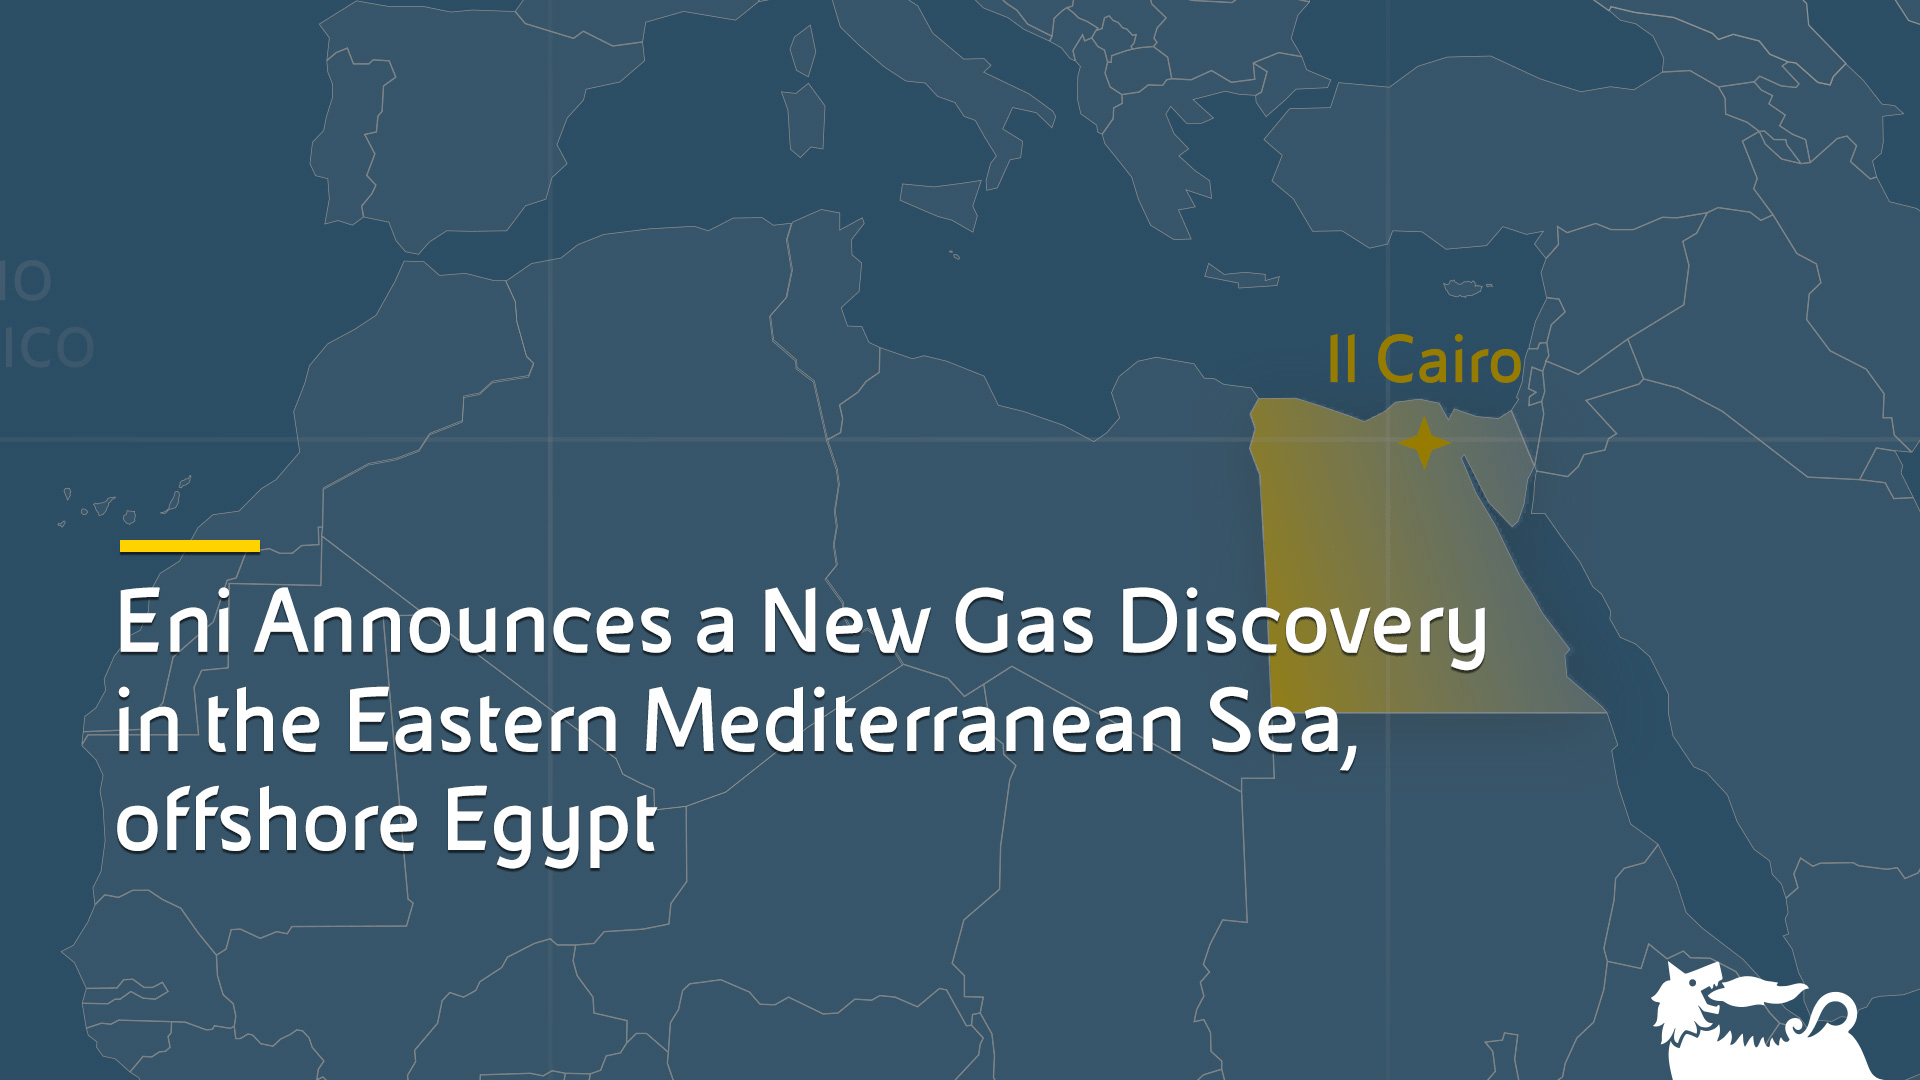 Eni Announces a New Gas Discovery in the Eastern Mediterranean Sea, offshore Egypt